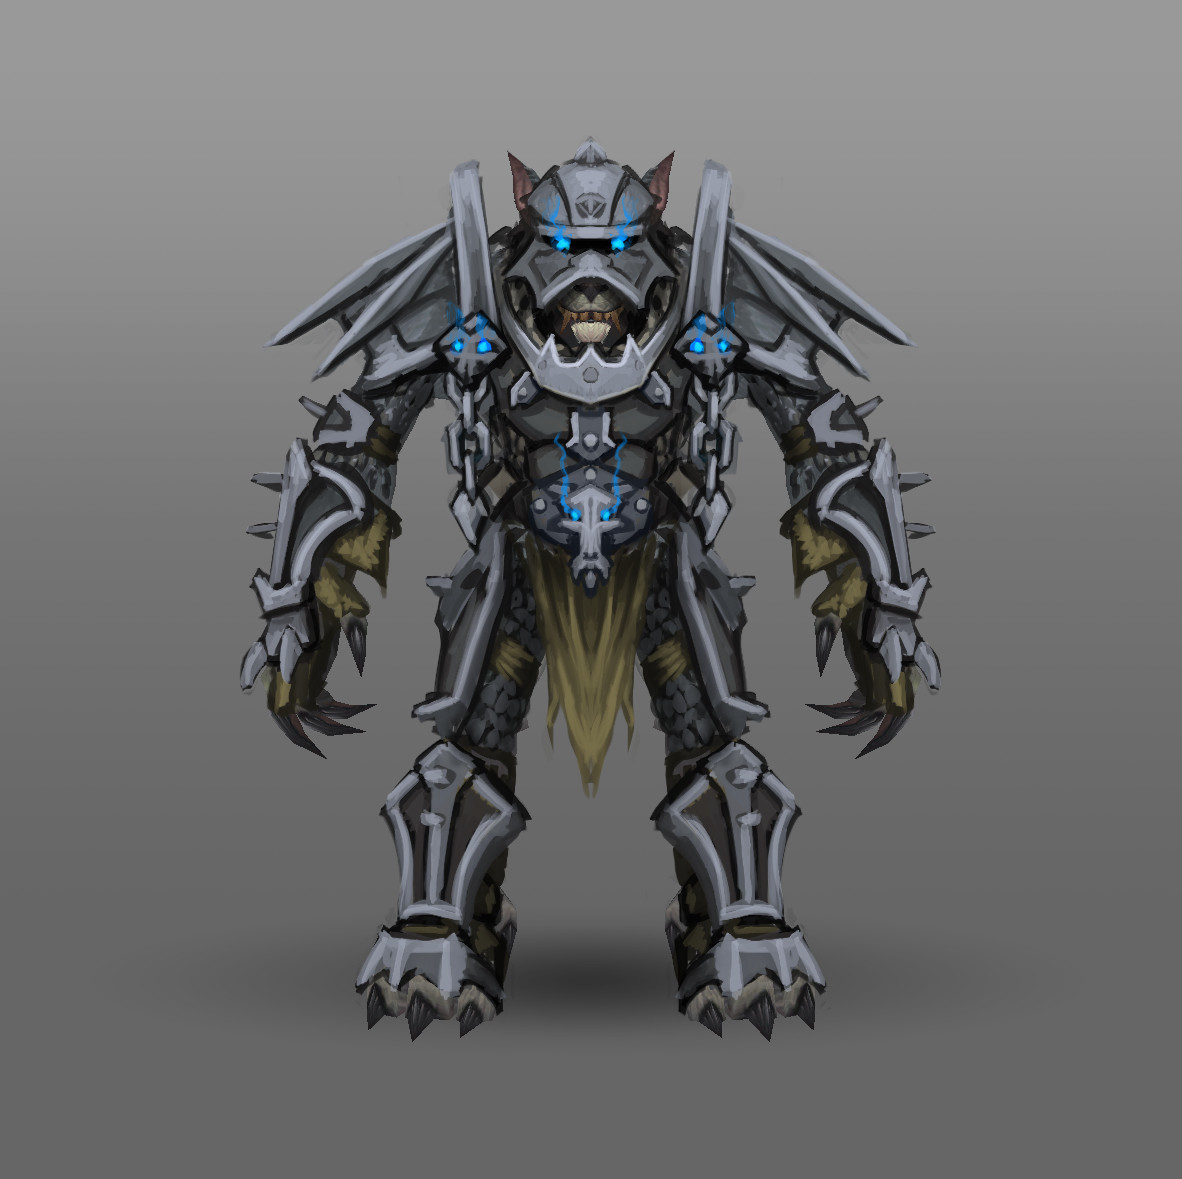 Deathknight (old)
The old version was partly inspired by gothic design elements and armors, but in the end it felt very generic, hence I updated it.